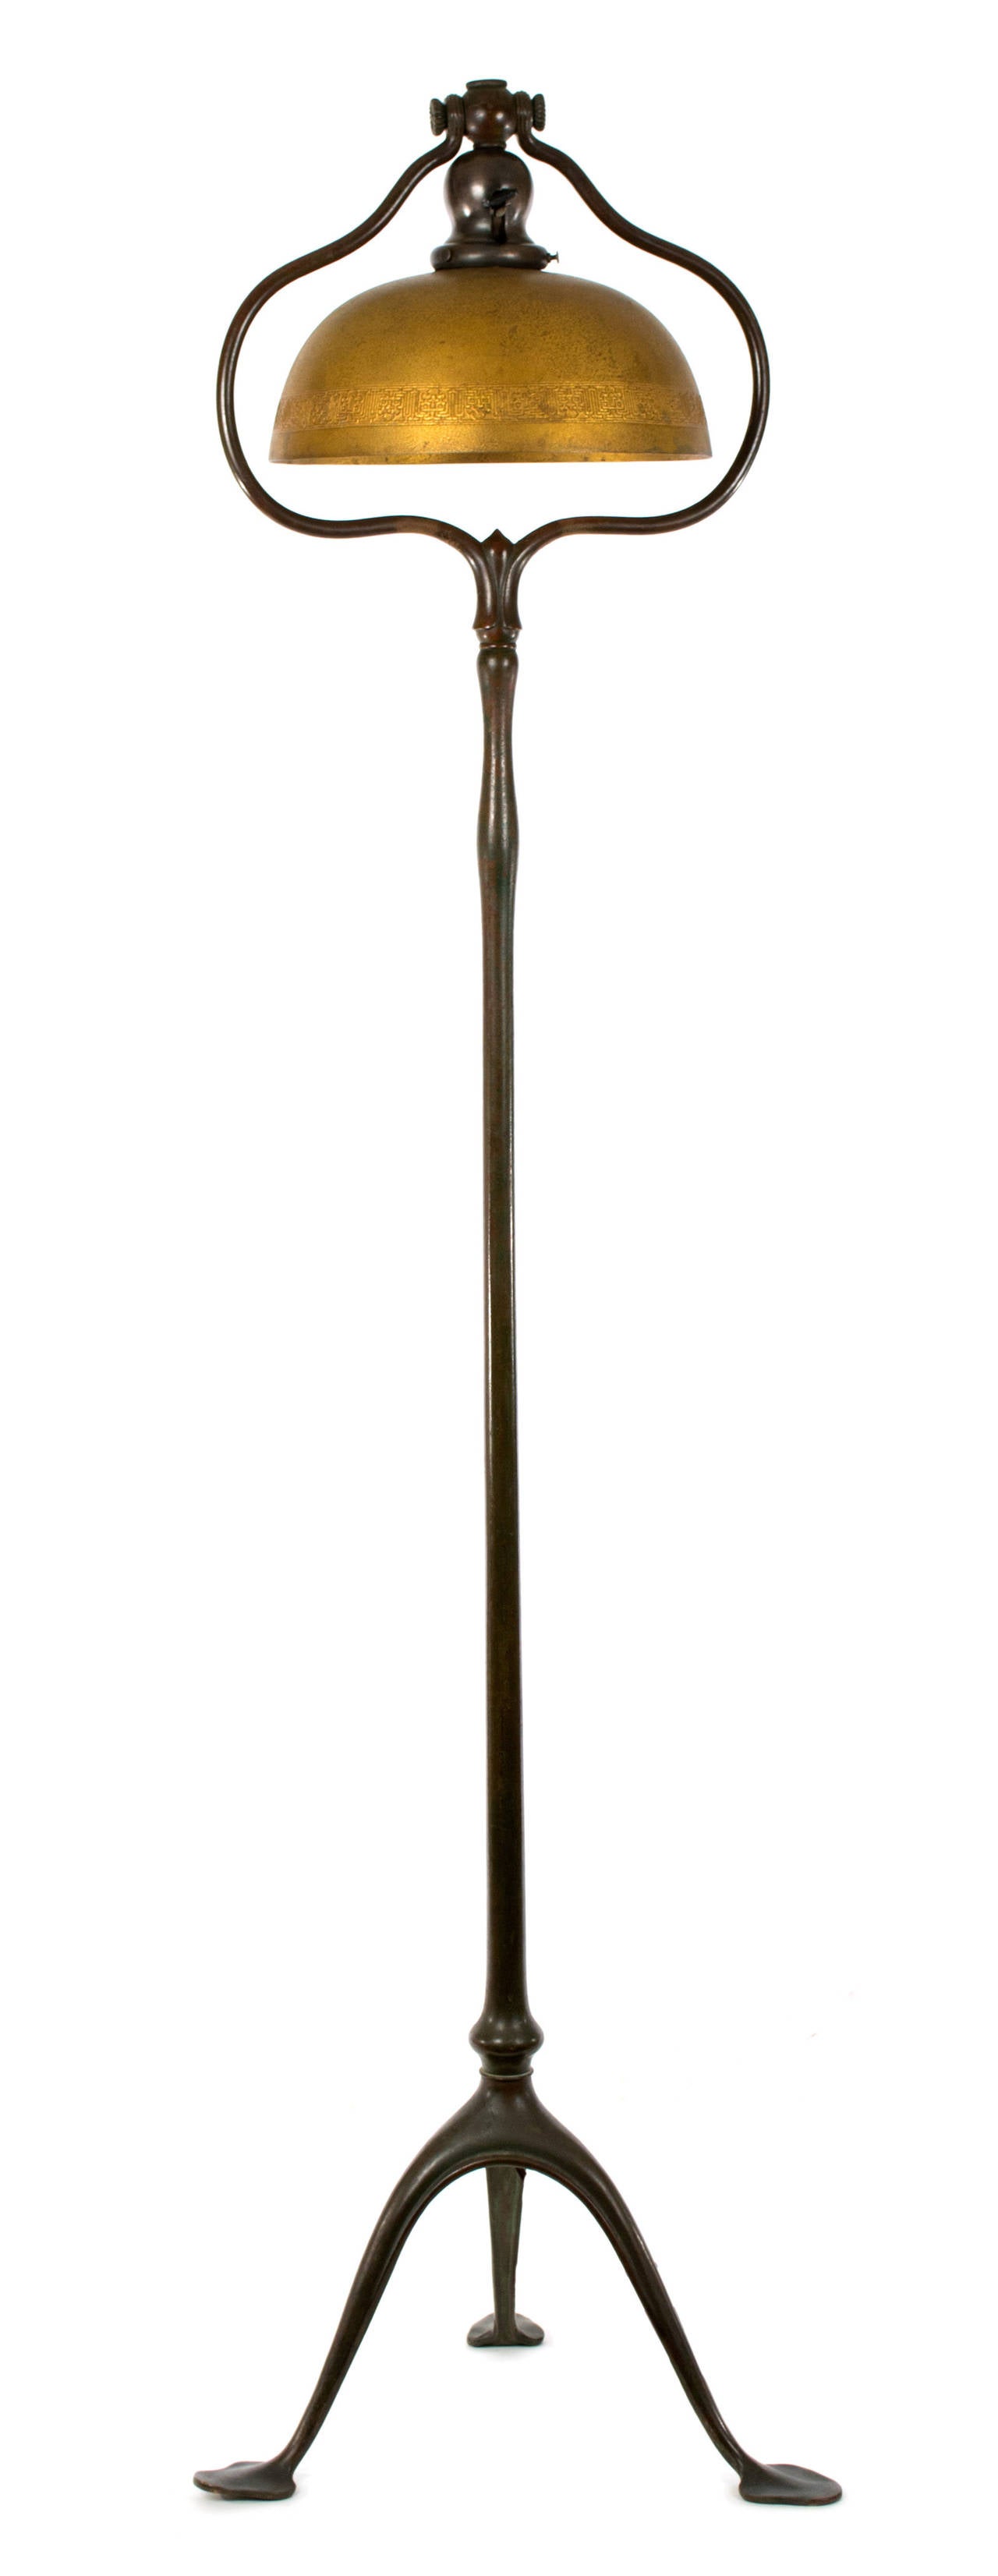 A three-legged bronze Tiffany Studios (stamped on the bottom) floor lamp with original patina and original lamp shade, made c. 1910 and exhibiting the organic, Art-Nouveau aesthetics found in Tiffany at the height of its quality; including